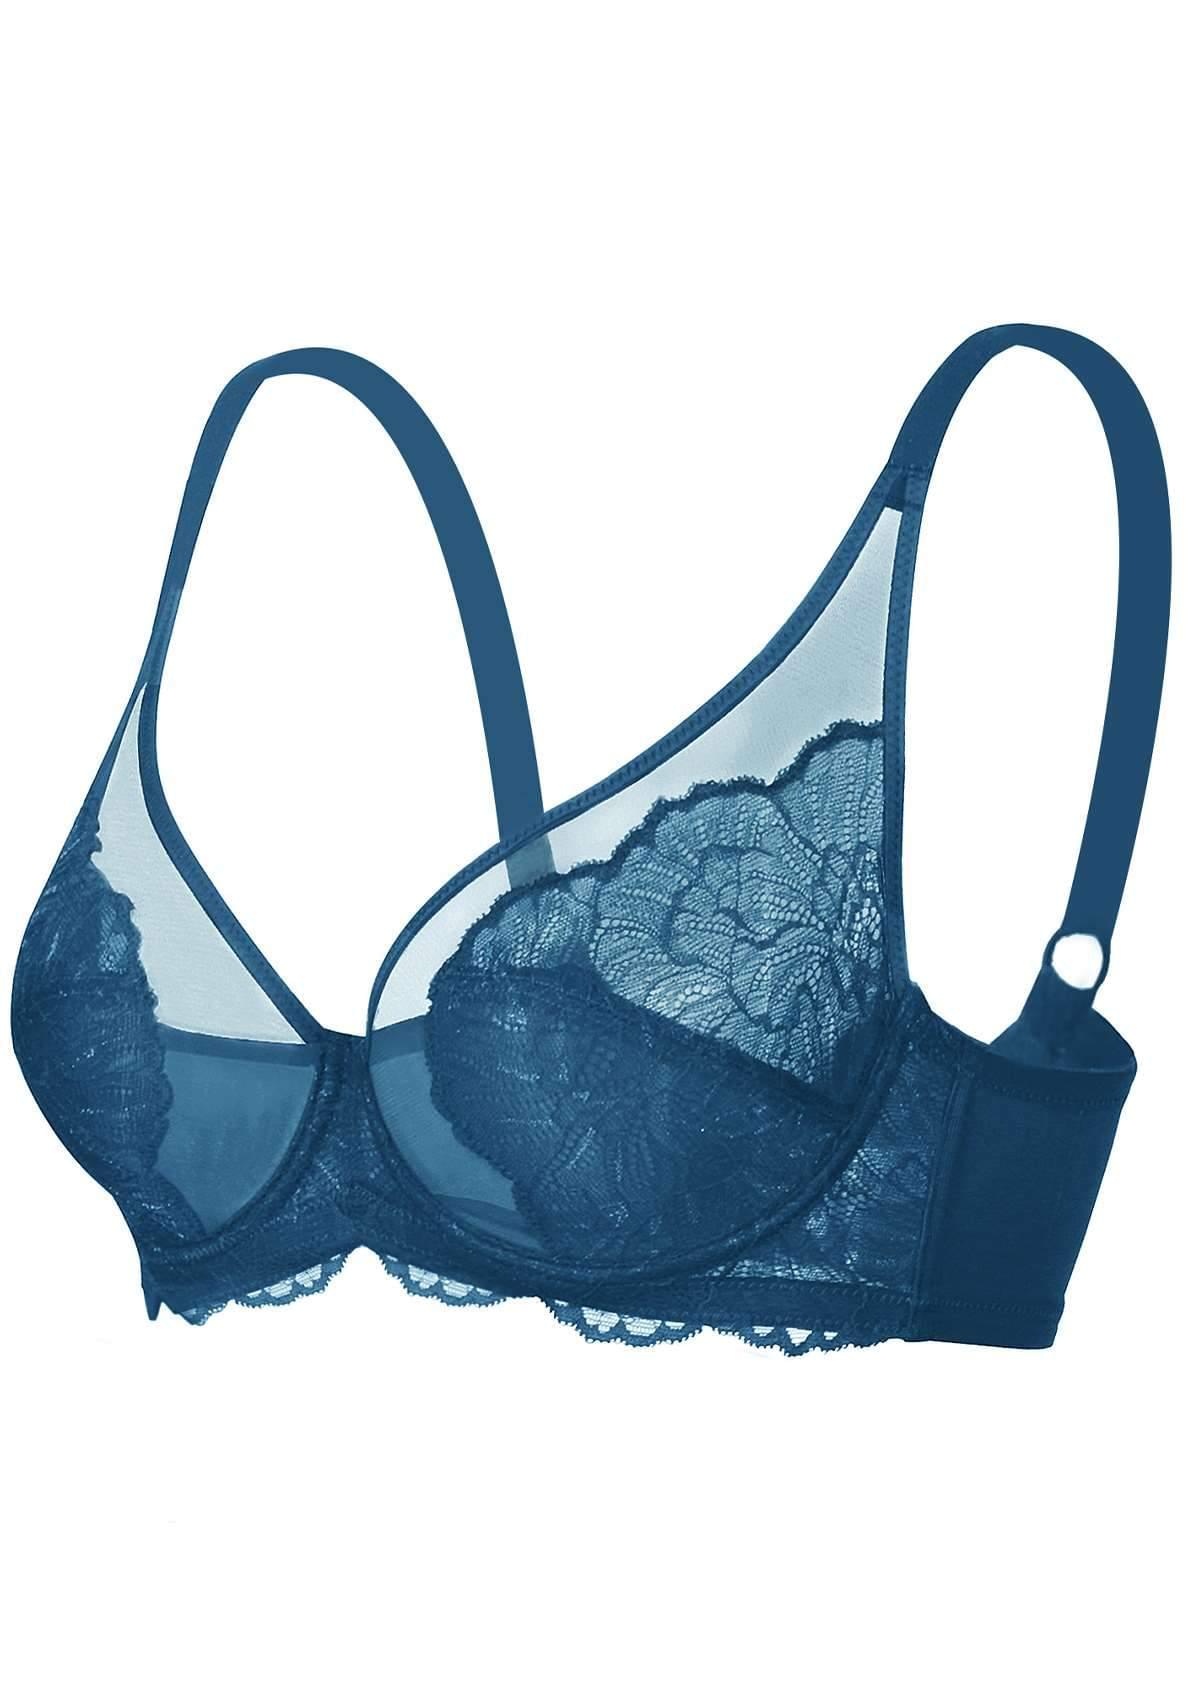 HSIA Blossom Lace Bra And Underwear Sets: Comfortable Plus Size Bra - Biscay Blue / 40 / C